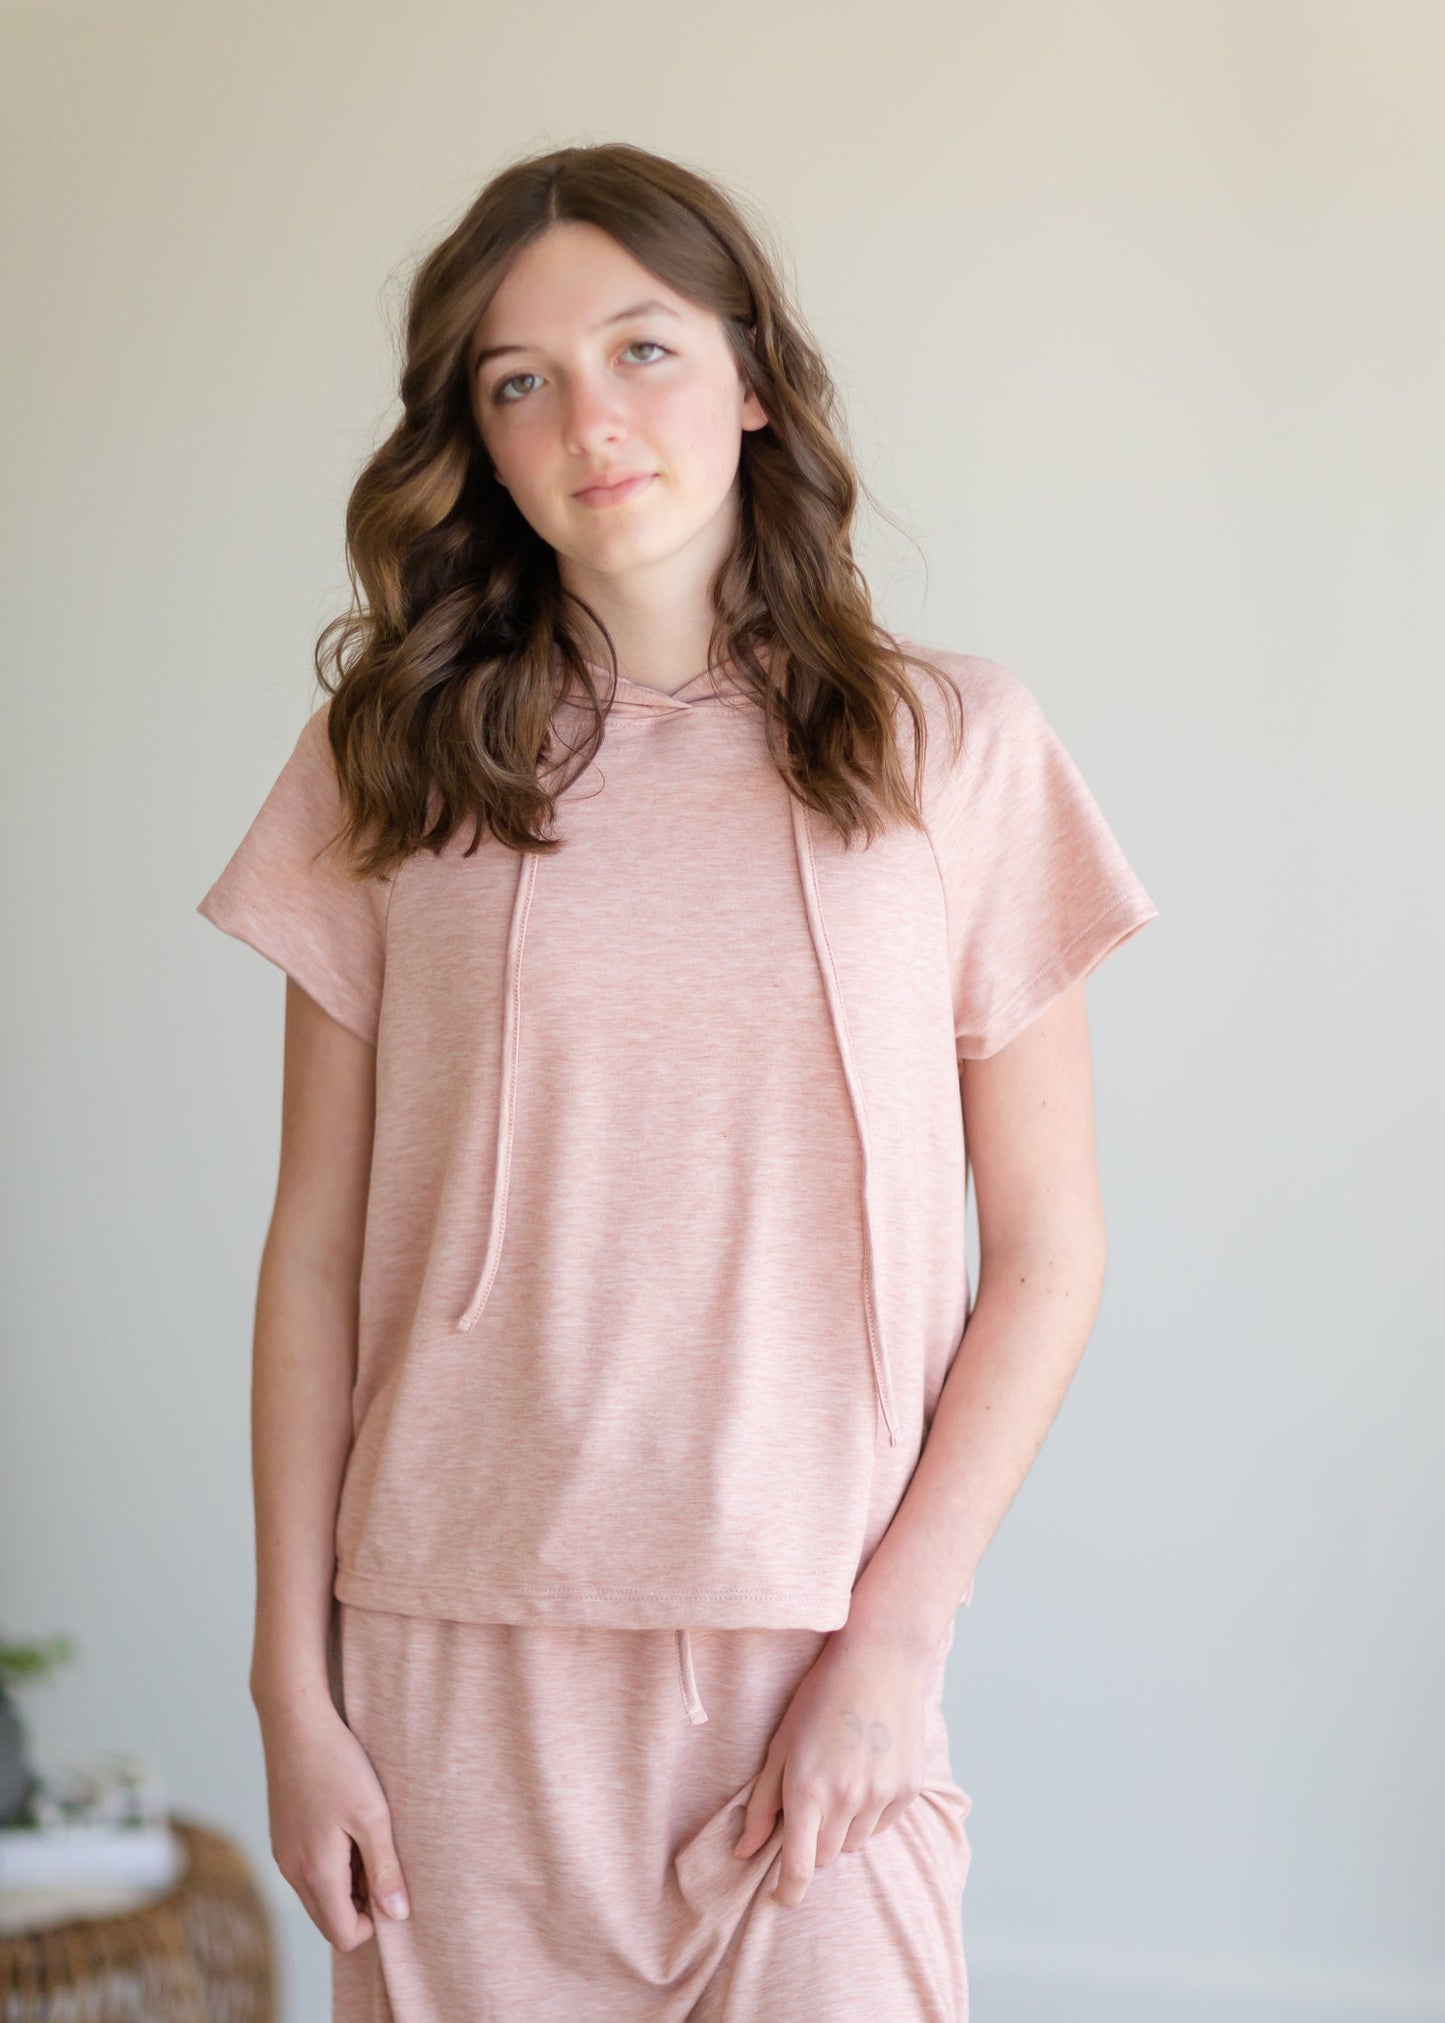 Rose Hooded French Terry Tee - FINAL SALE Tops